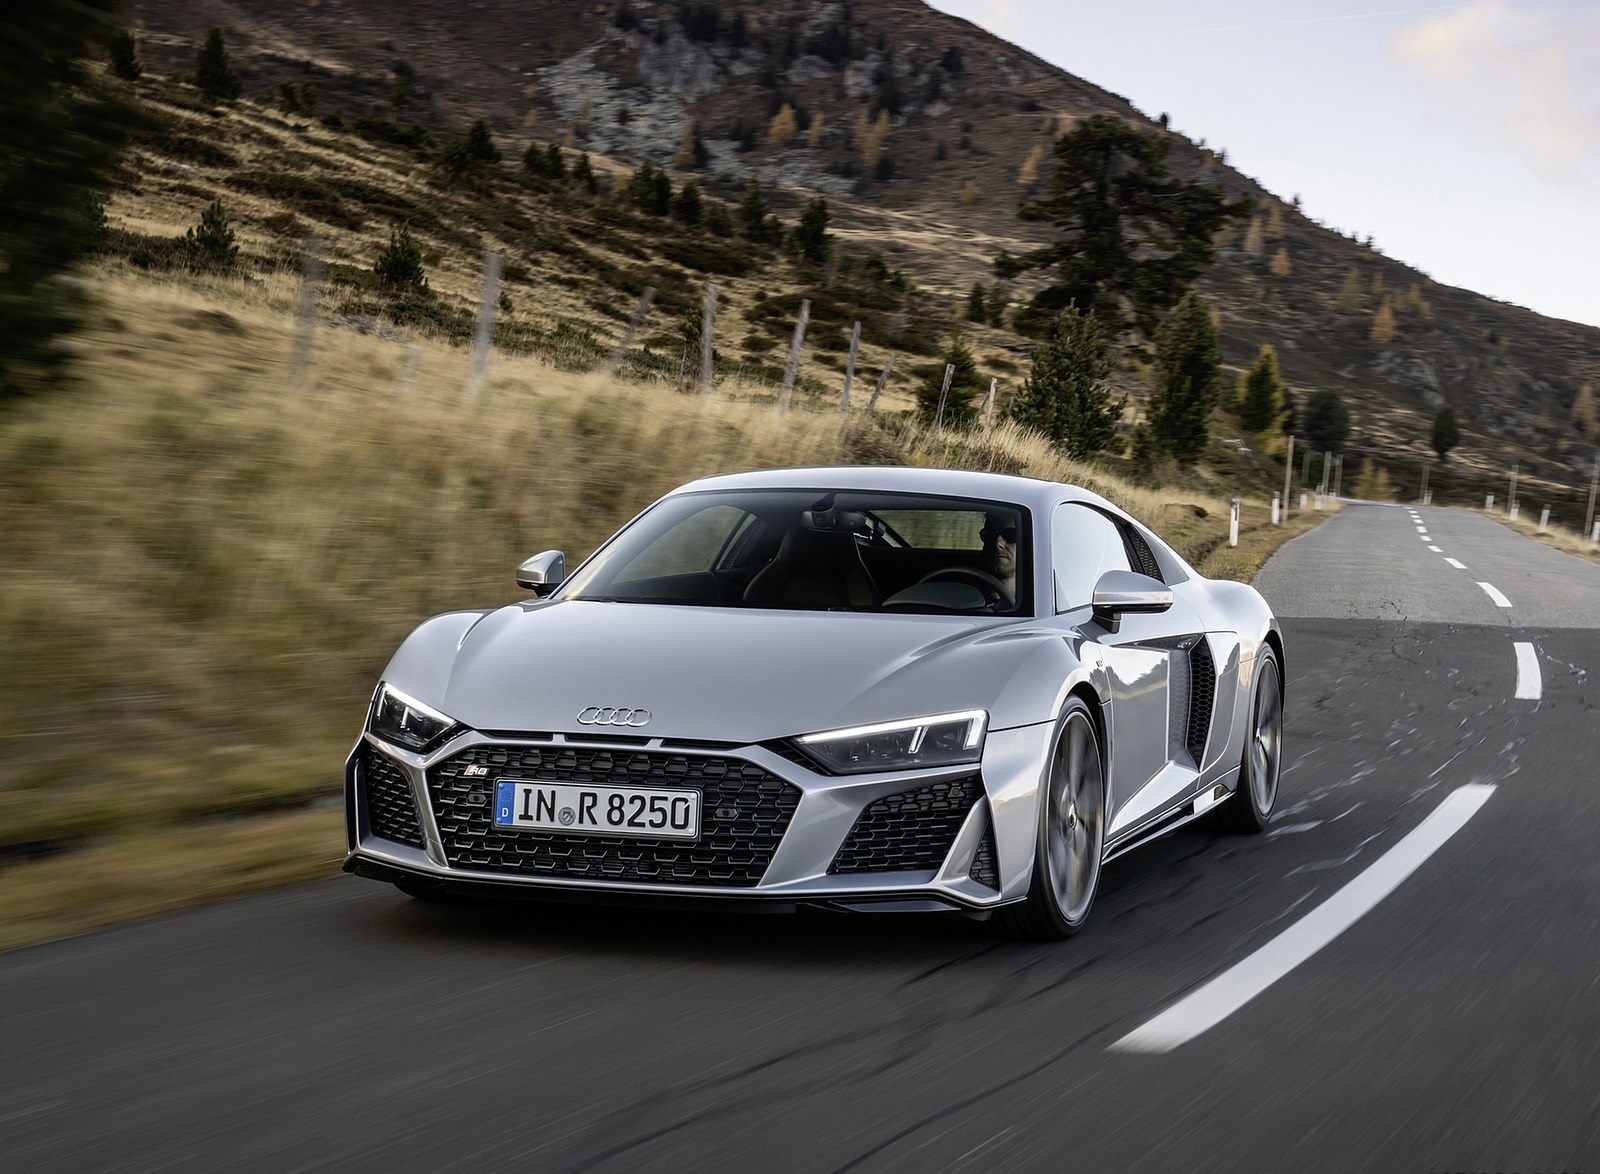 2020 Audi R8 V10 RWD Coupe Wallpapers 32 HD Images   NewCarCars 1600x1174